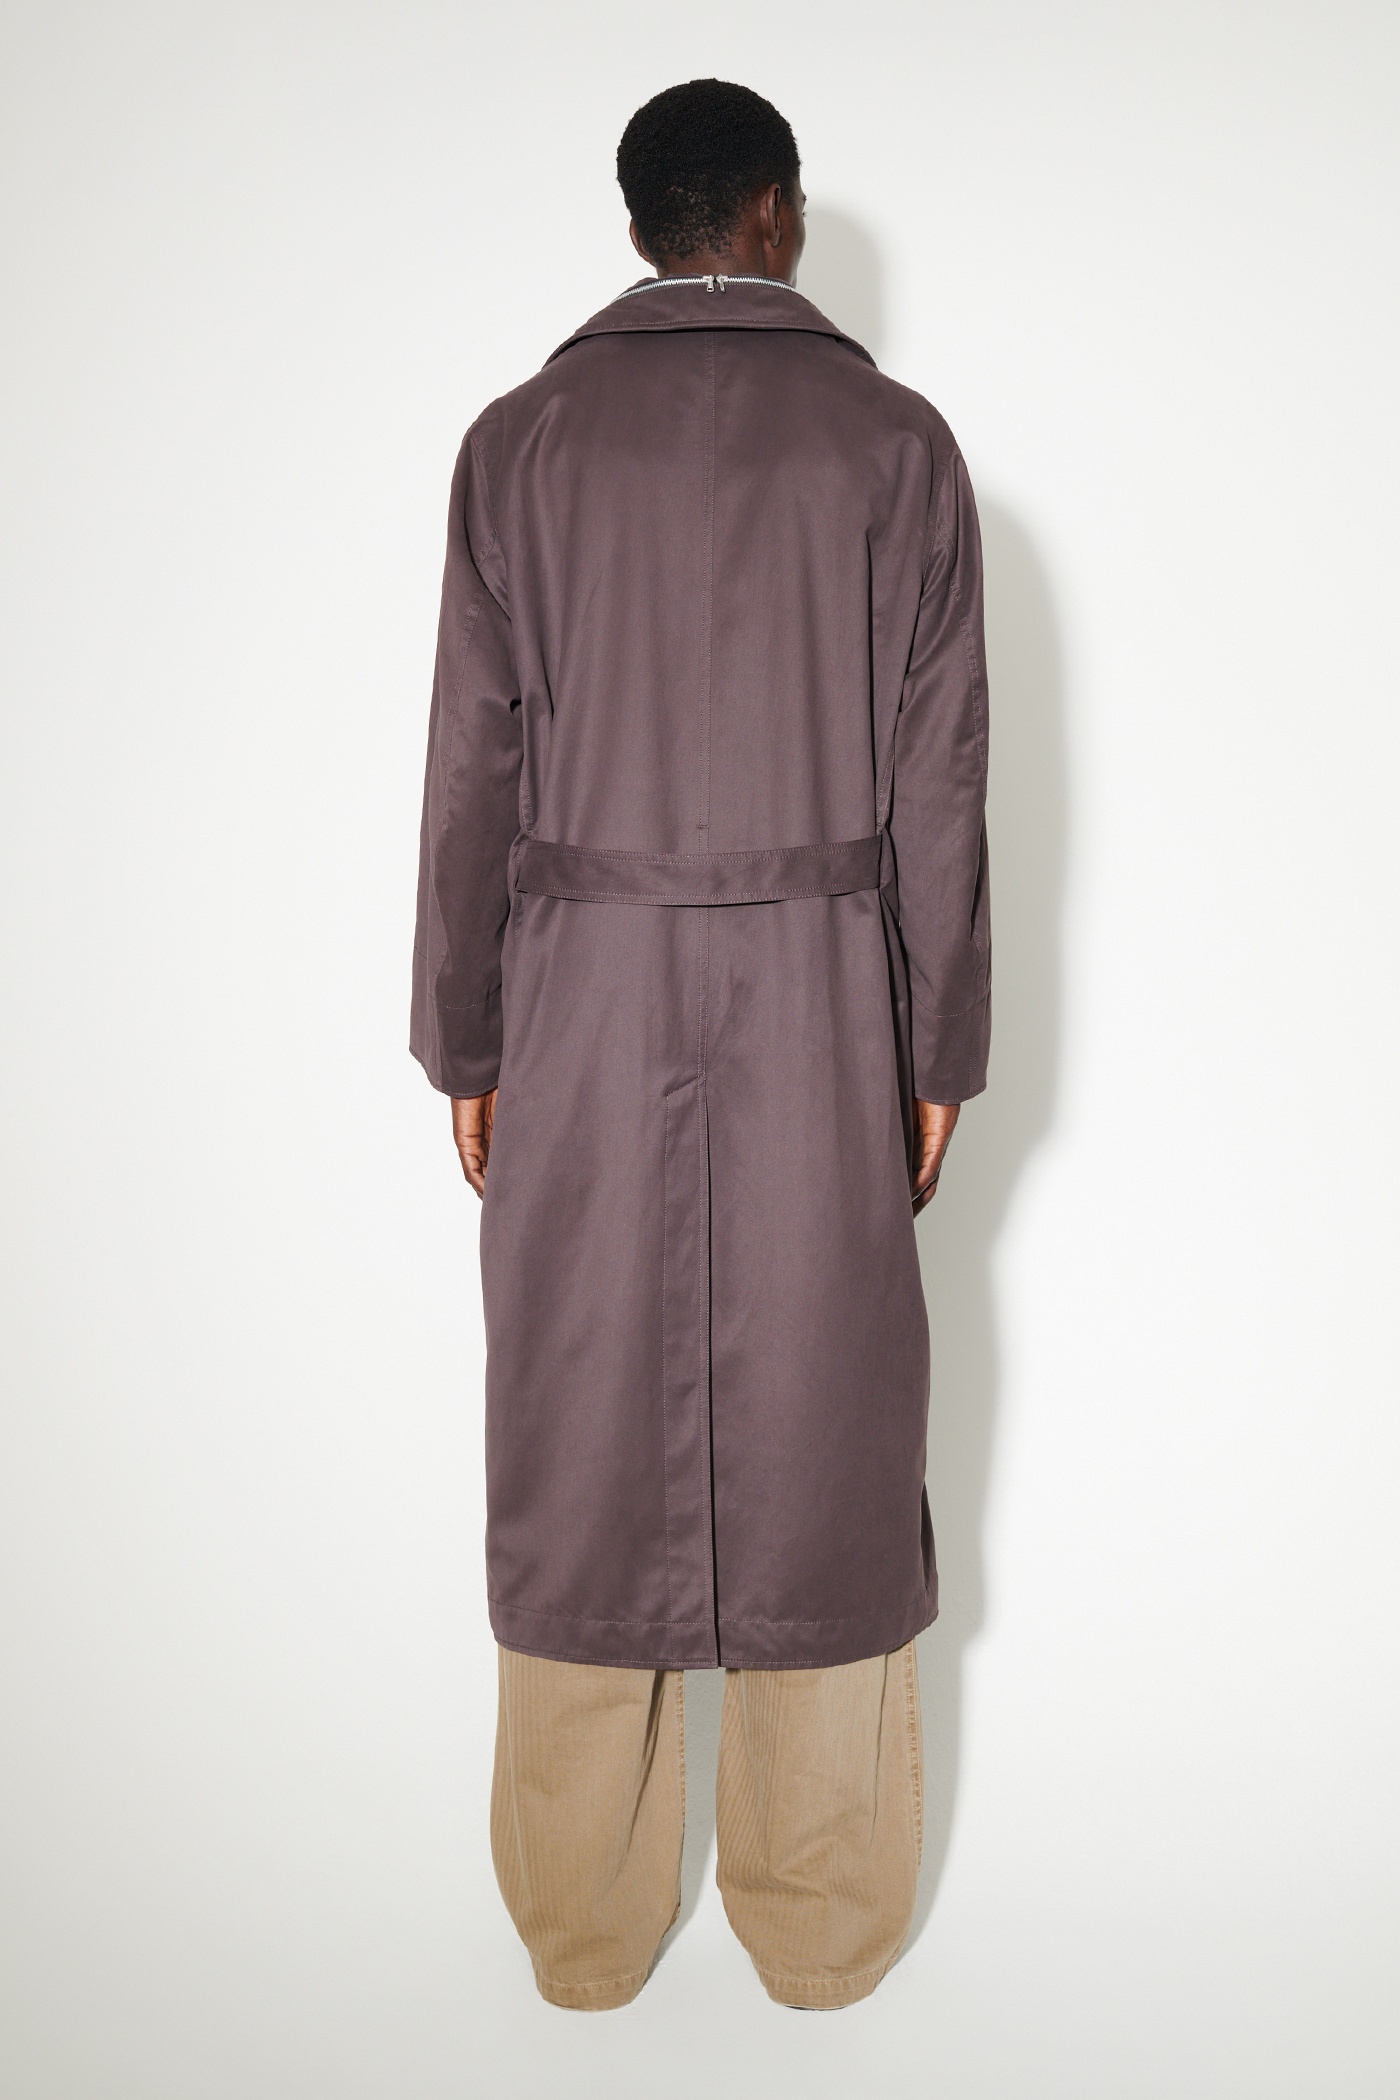 Emerge Coat Profound Brown Peached Tech - 4